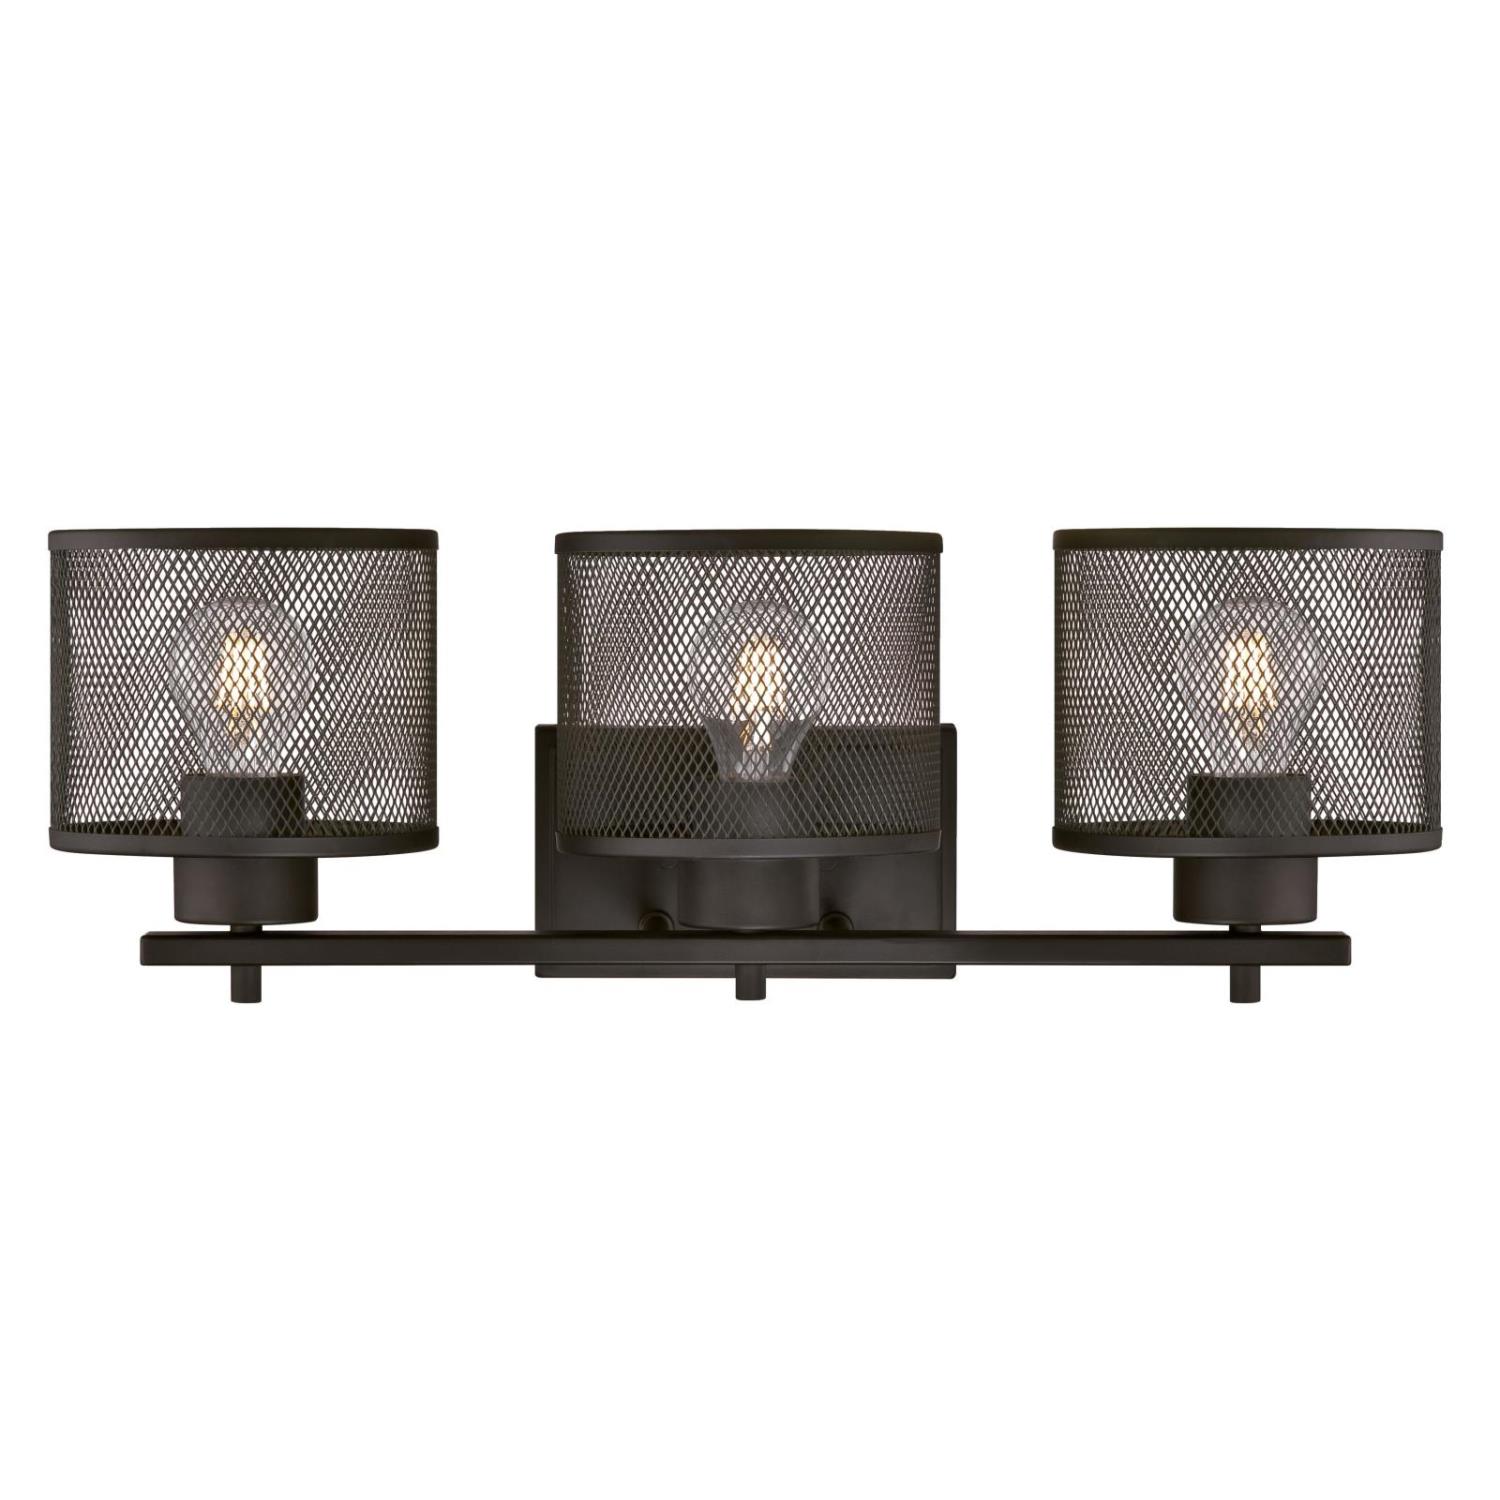 3 Light Wall Fixture Oil Rubbed Bronze Finish with Mesh Shades